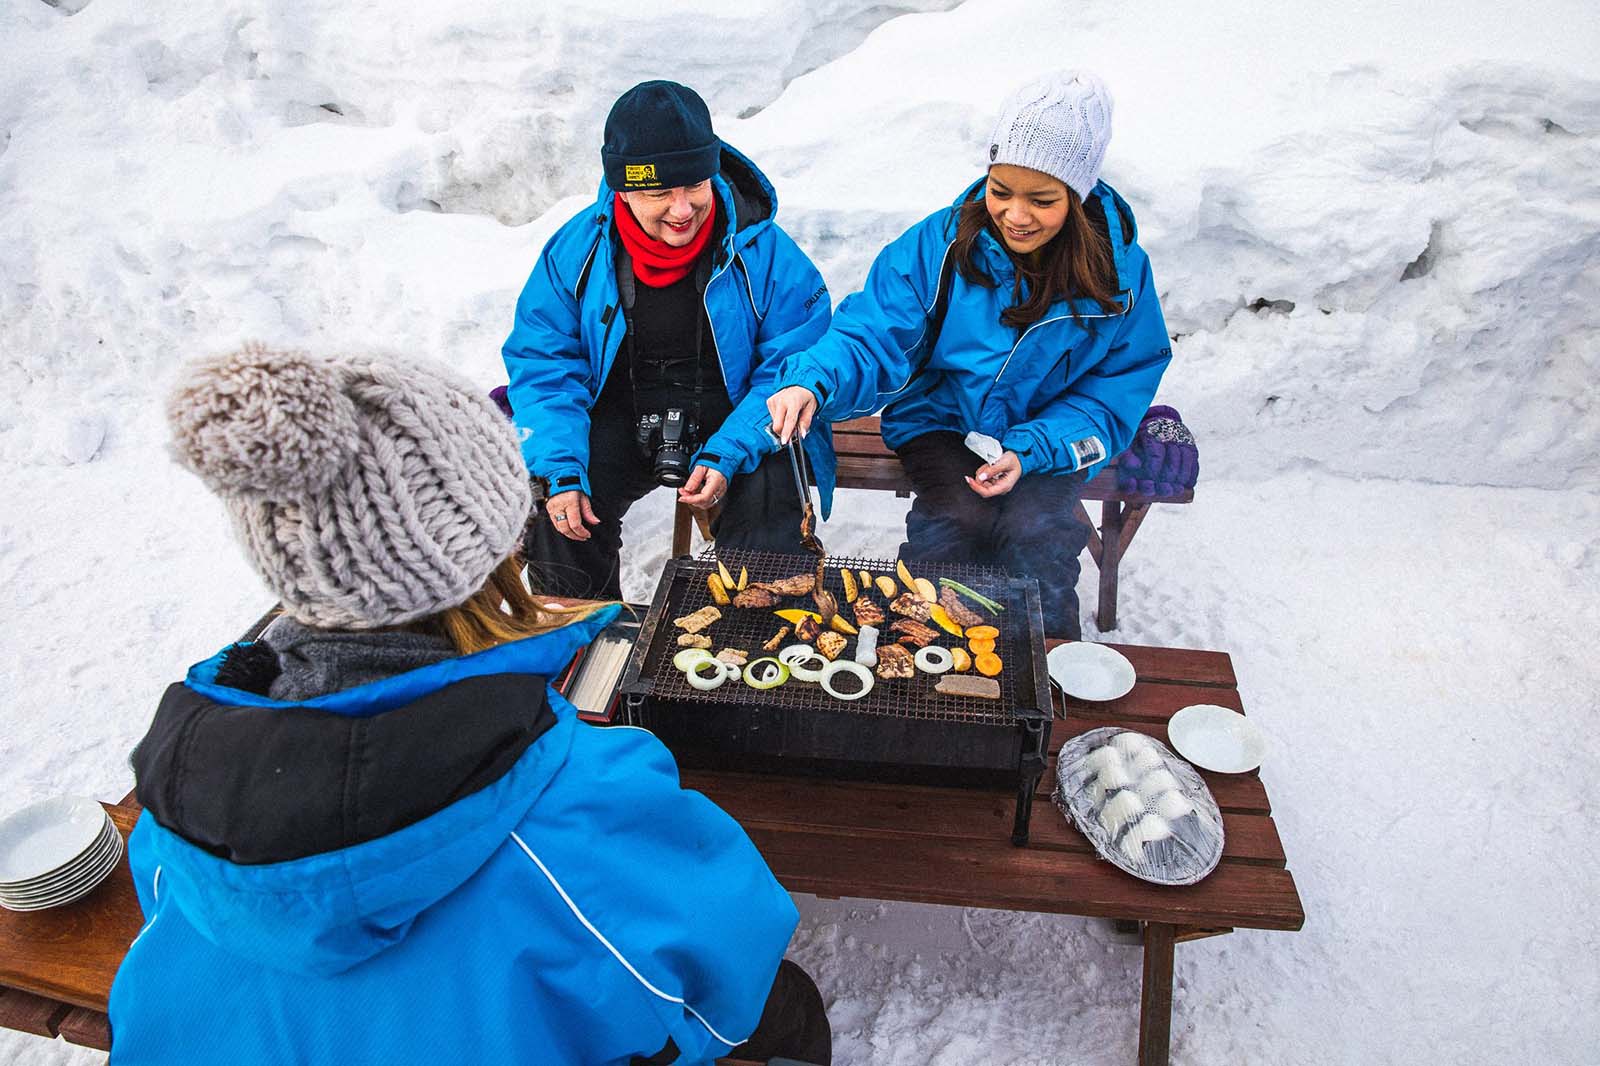 Barbecue lunch after a snowmobile tour in Hokkaido, Japan | Winter in Sapporo